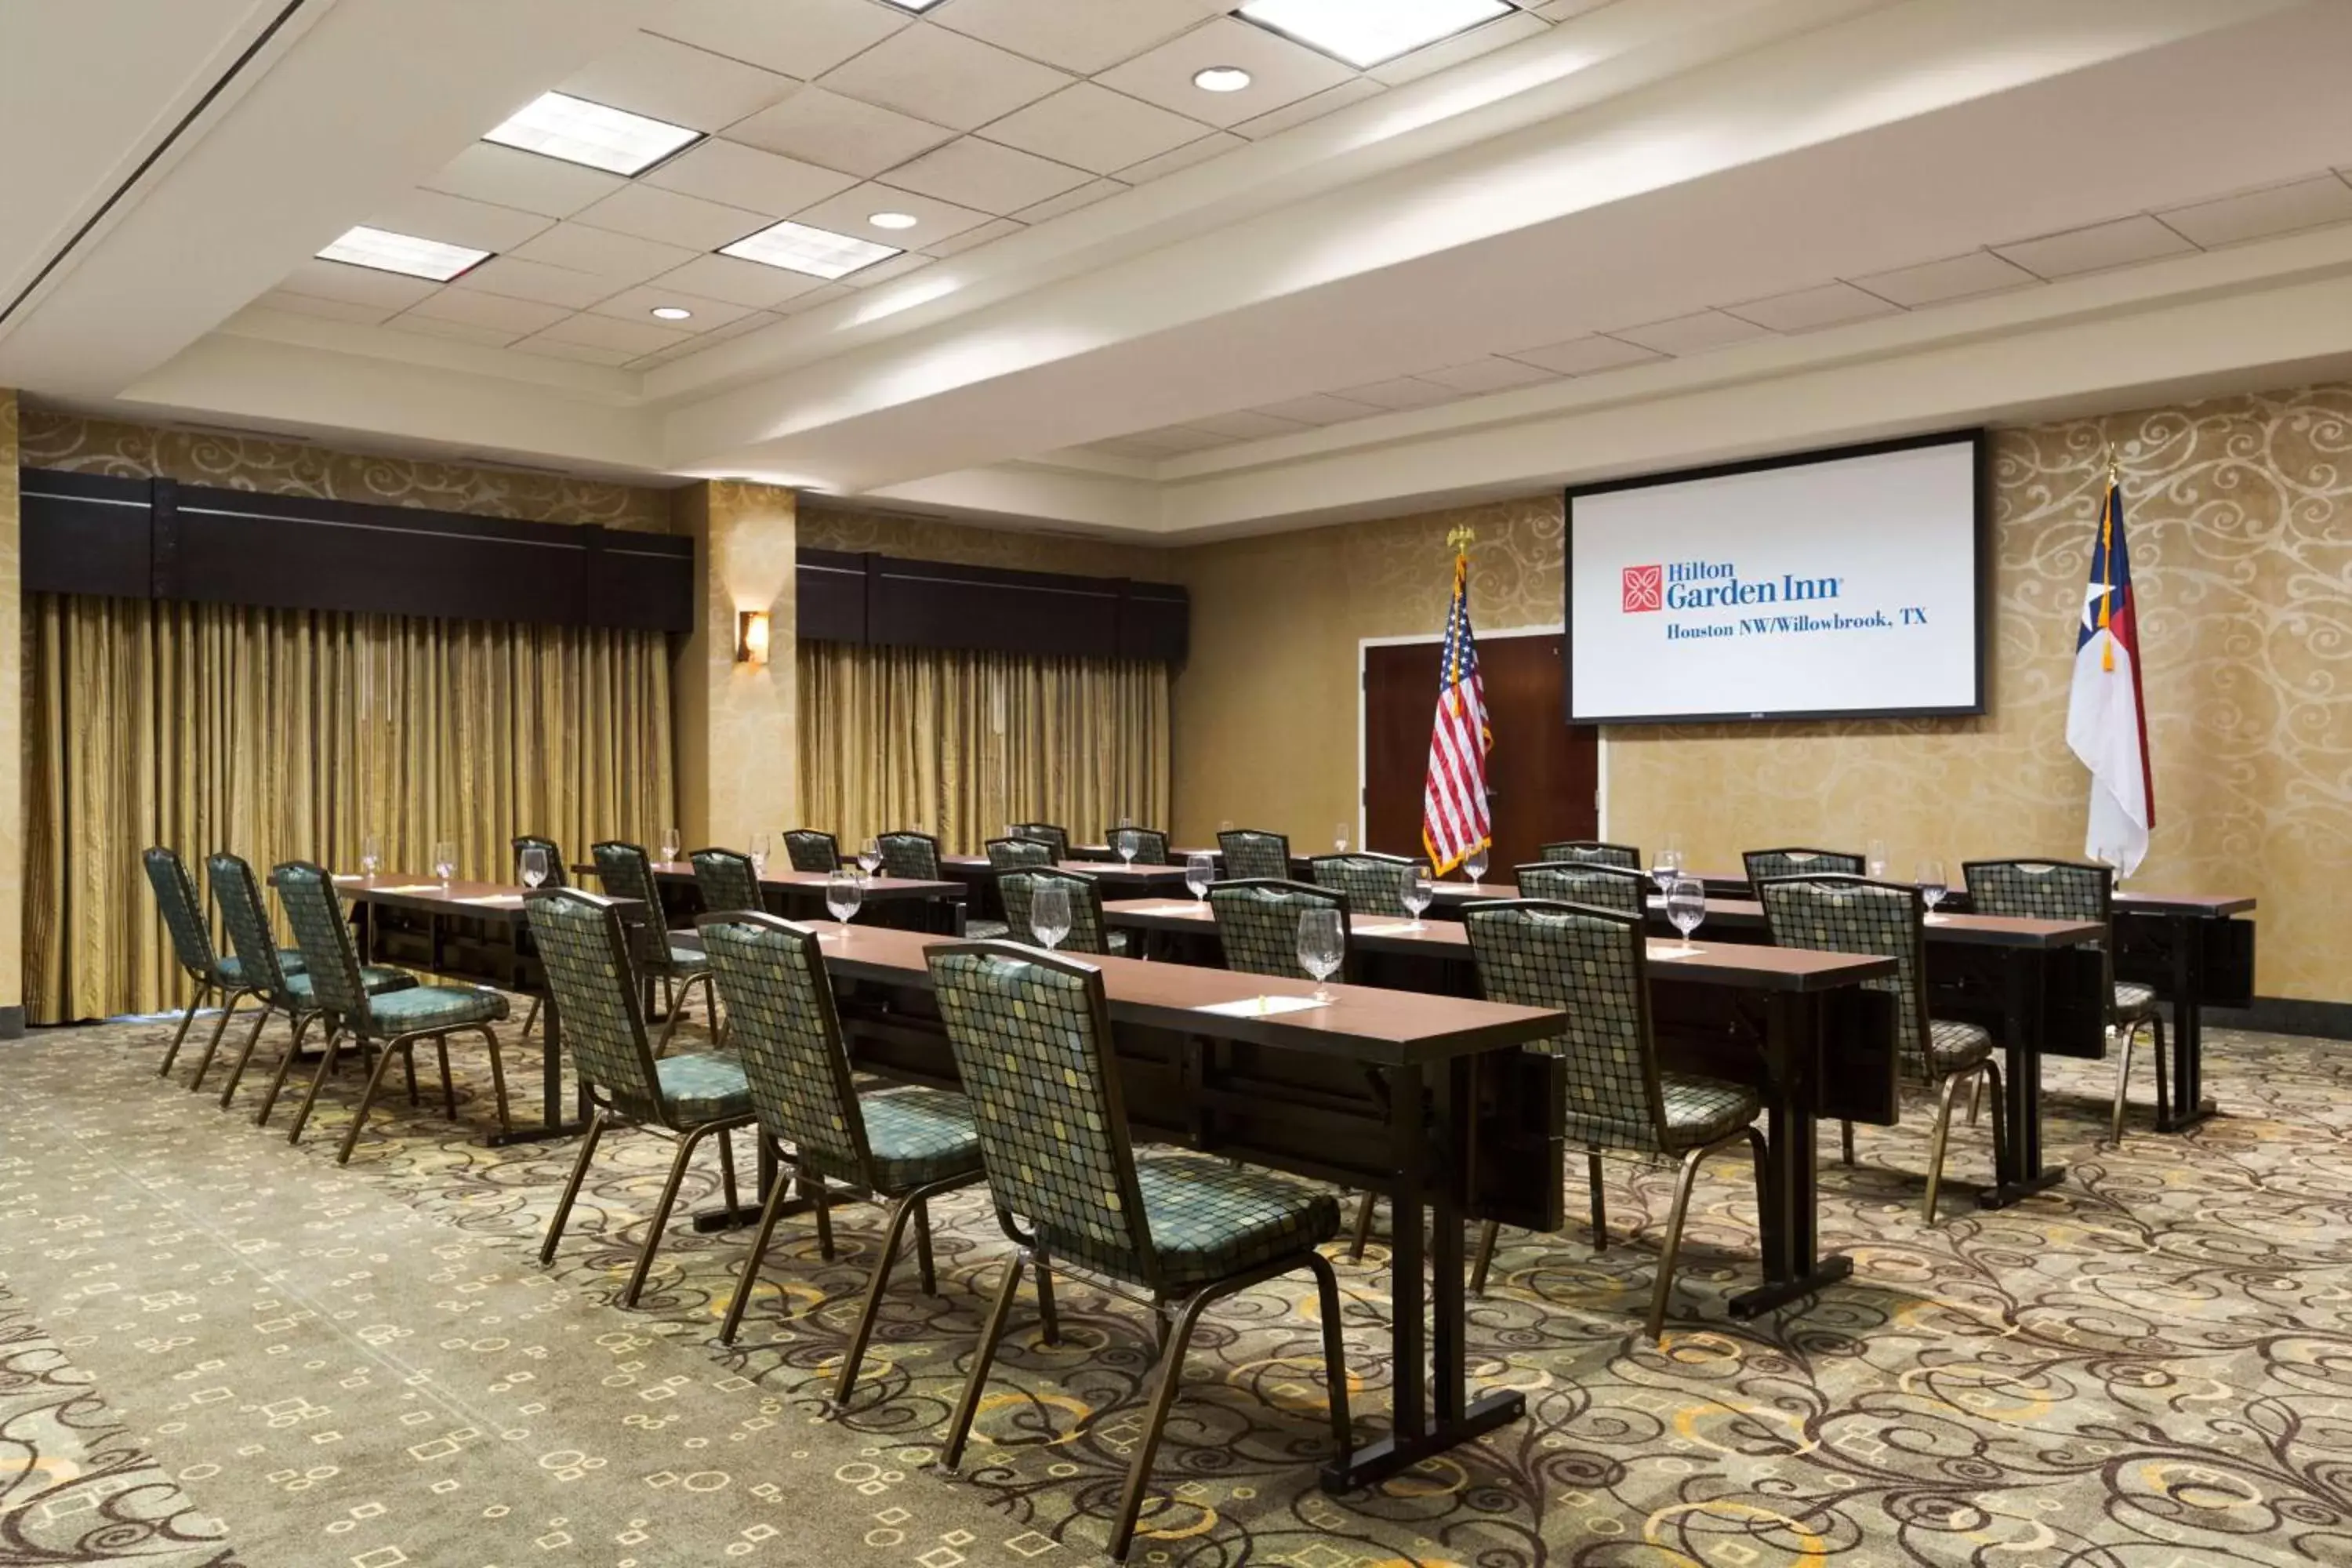 Meeting/conference room, Business Area/Conference Room in Hilton Garden Inn Houston Northwest